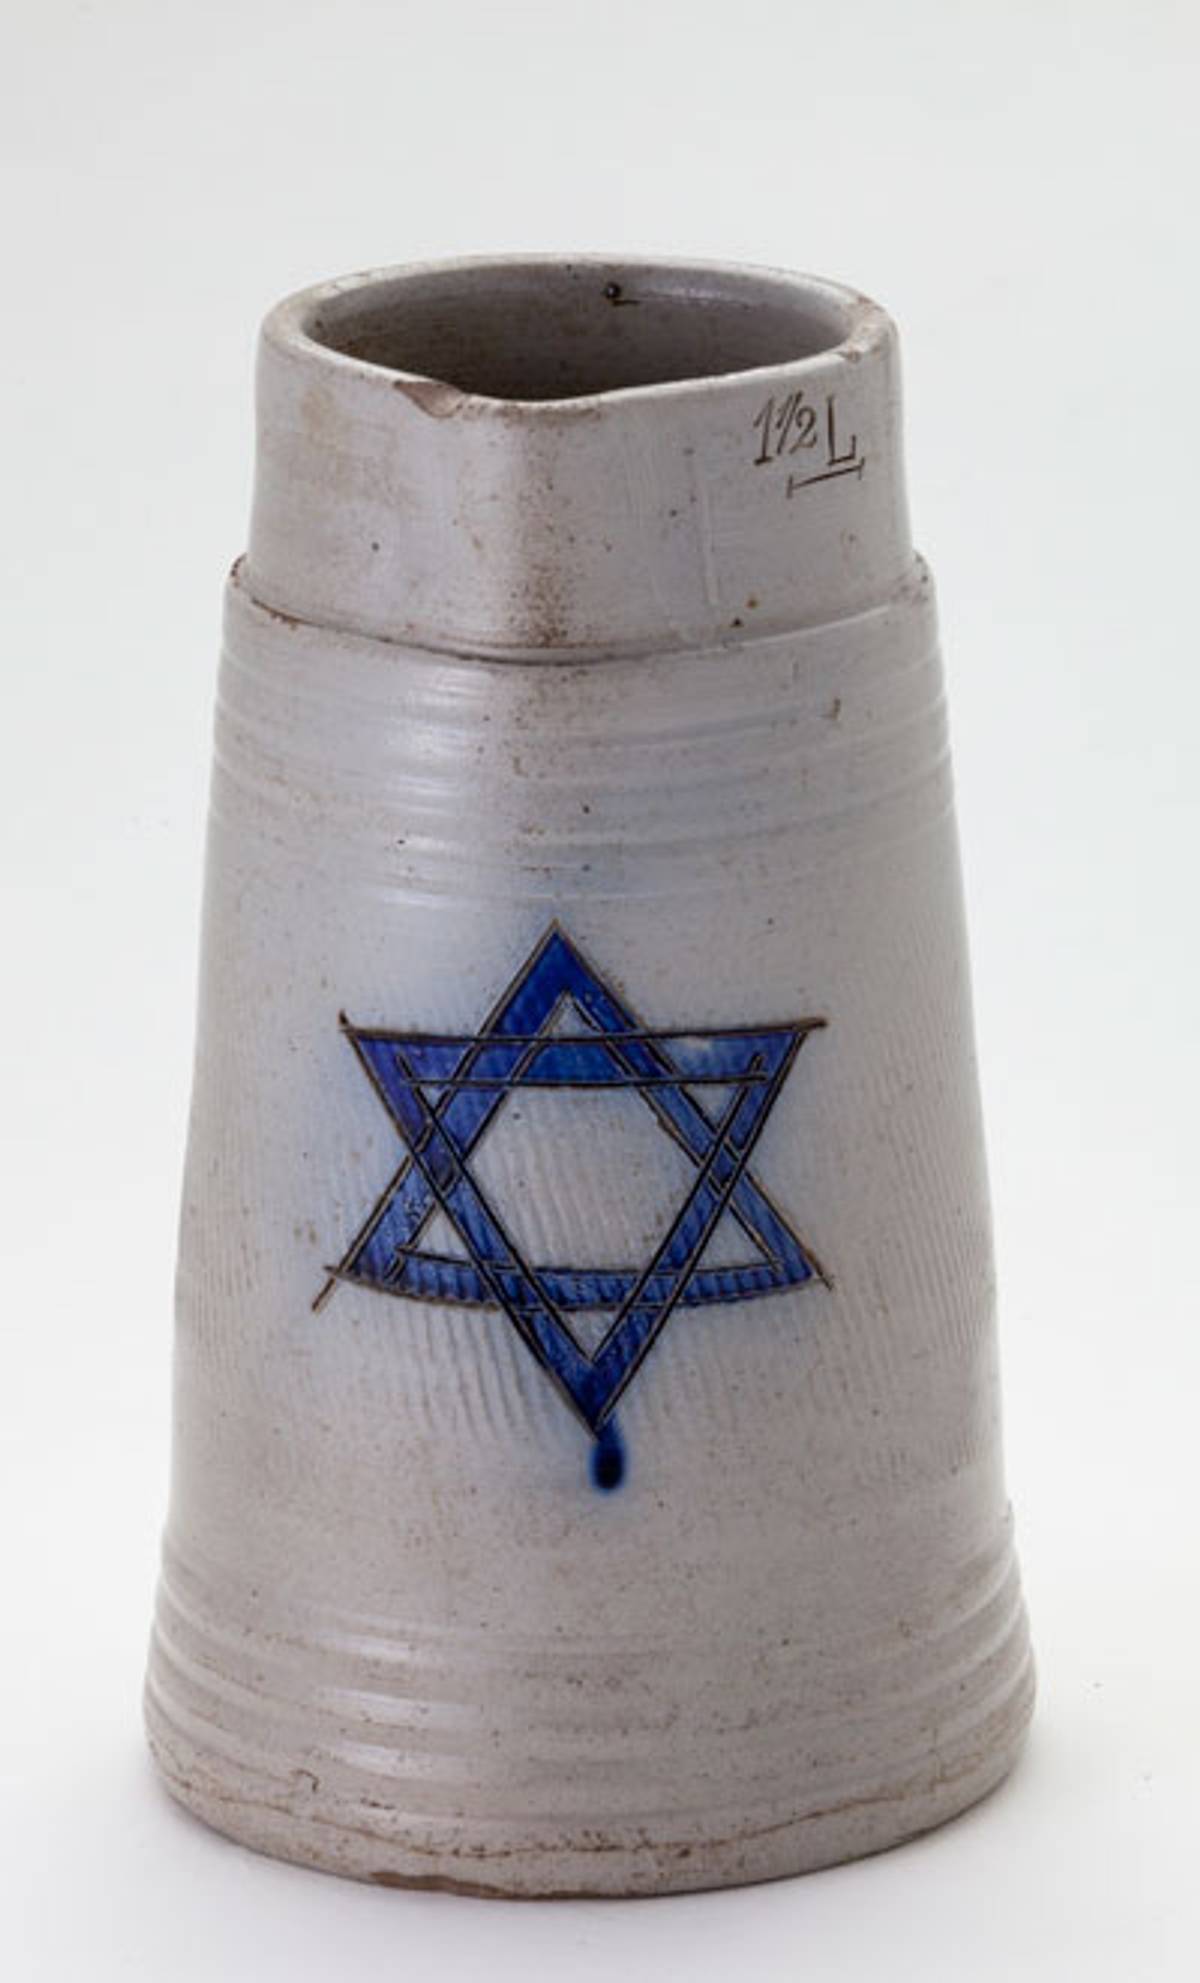 Beer mug with a brewer’s star from the Westerwald region of Germany, circa 1880. (Photo: Franz Kimmel/Jewish Museum Munich)